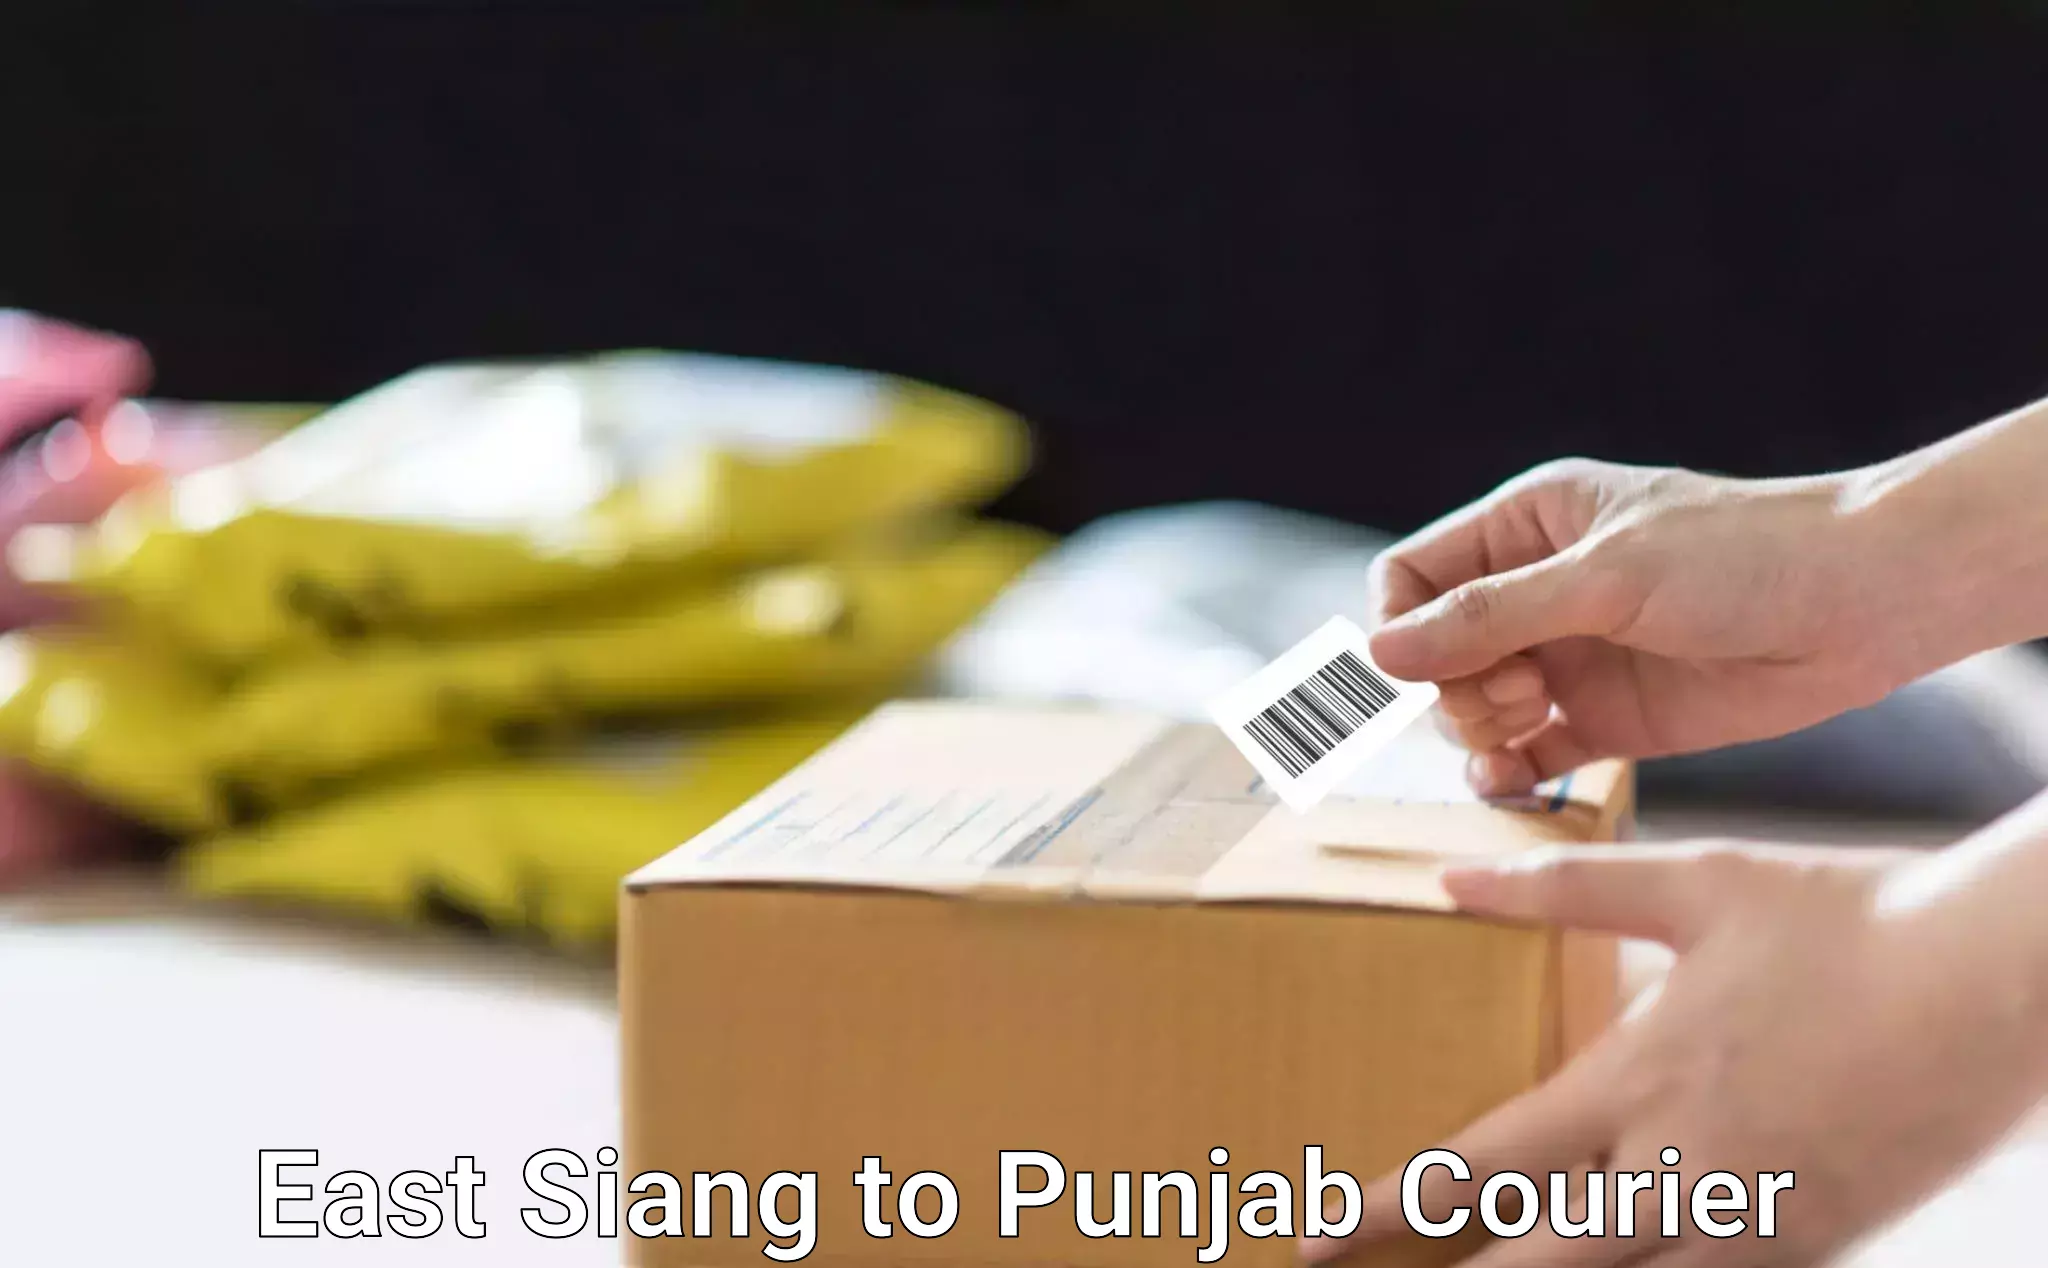 Affordable parcel rates East Siang to Central University of Punjab Bathinda